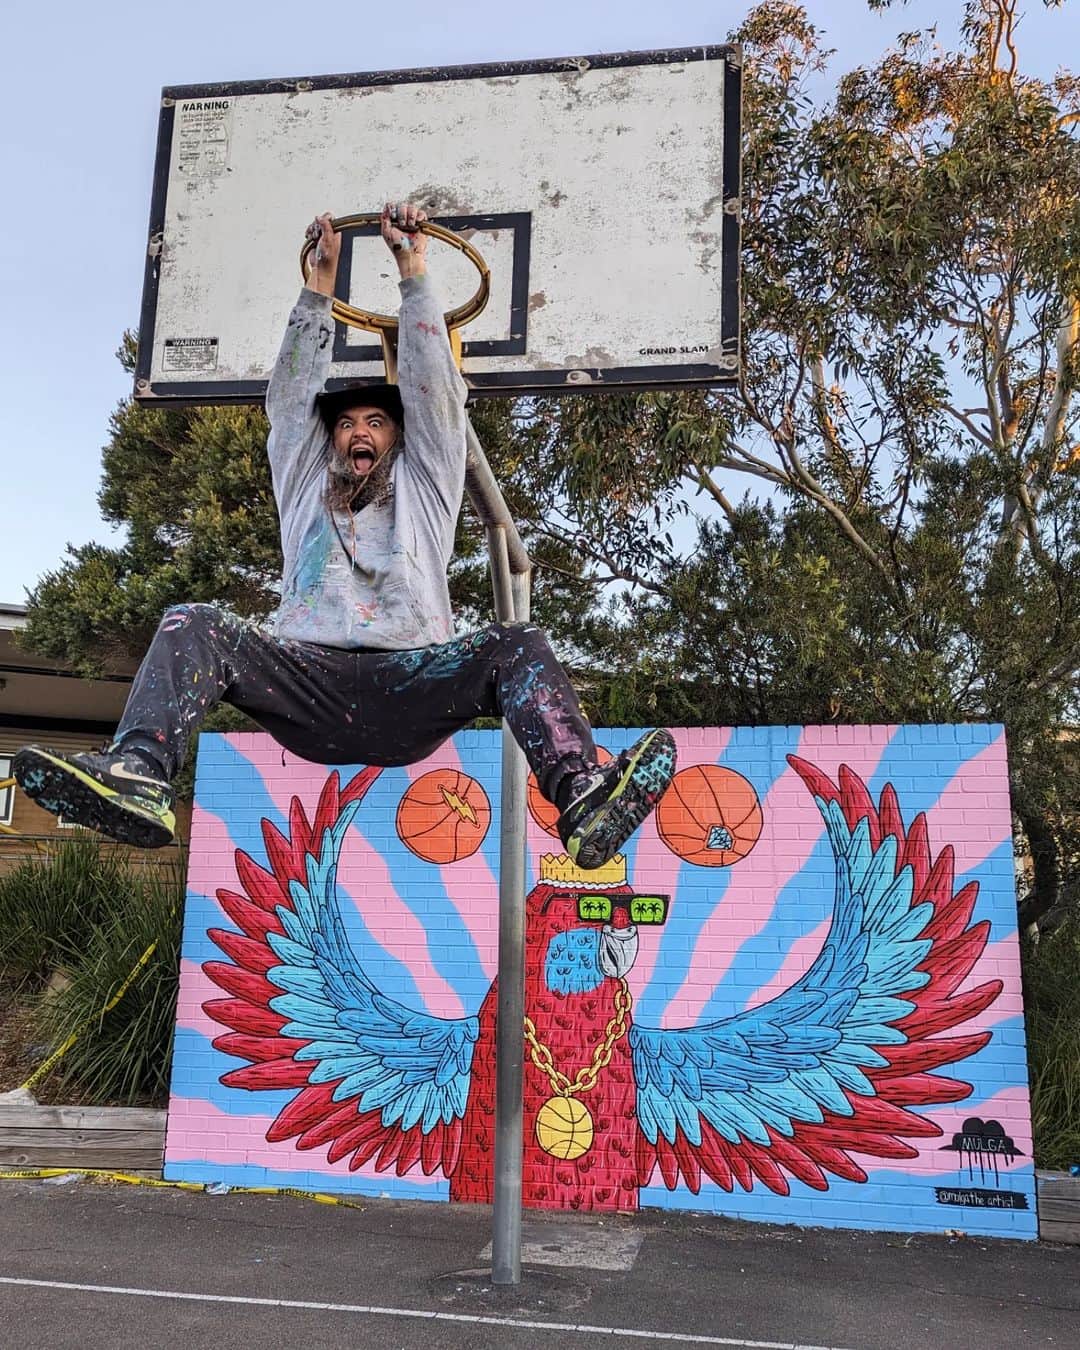 MULGAのインスタグラム：「Fun times painting a B-ball Rosella mural over 2 days at Lucas Heights Community School last week.⁣ ⁣ I did a celebratory dunk after I finished*.⁣ ⁣ The story of Randy the Rosella ⁣ ⁣ Once there was a Rosella called Randy and  he enjoyed playing basketball immensely and was actually pretty good at it. ⁣ ⁣ He rose to the pinnacle of the ABL (Aviary Basketball League) and won a few championships before a big scandal erupted and he was given a life ban from playing in ABL. ⁣ ⁣ The reason he was banned was because it was discovered that he was using his magical telekinetic powers to control the basketball in games. Basically whenever he took a shot he was able to telekinetically cause the ball to always go in the hoop. ⁣ ⁣ He didn't always have those powers and he only got them one day when he was rummaging around at his local dump and ate a radioactive gummy worm that he found. ⁣ ⁣ Anyhow, after he was banned he developed and toured a show around the country where he did heaps of cool telekinetic tricks and stuff. It was mad popular and kept him busy for years. ⁣ ⁣ The End ⁣ ⁣ *Not true.⁣ ⁣ #mulgatheartist #art #artistsoninstagram #artoftheday #artwork #artofinstagram #australianart #australianartist #artistic #muralartist #muralart #mural #muralist #artworking #painting #schoolmural #rosella #basketballart #rosellapainting」